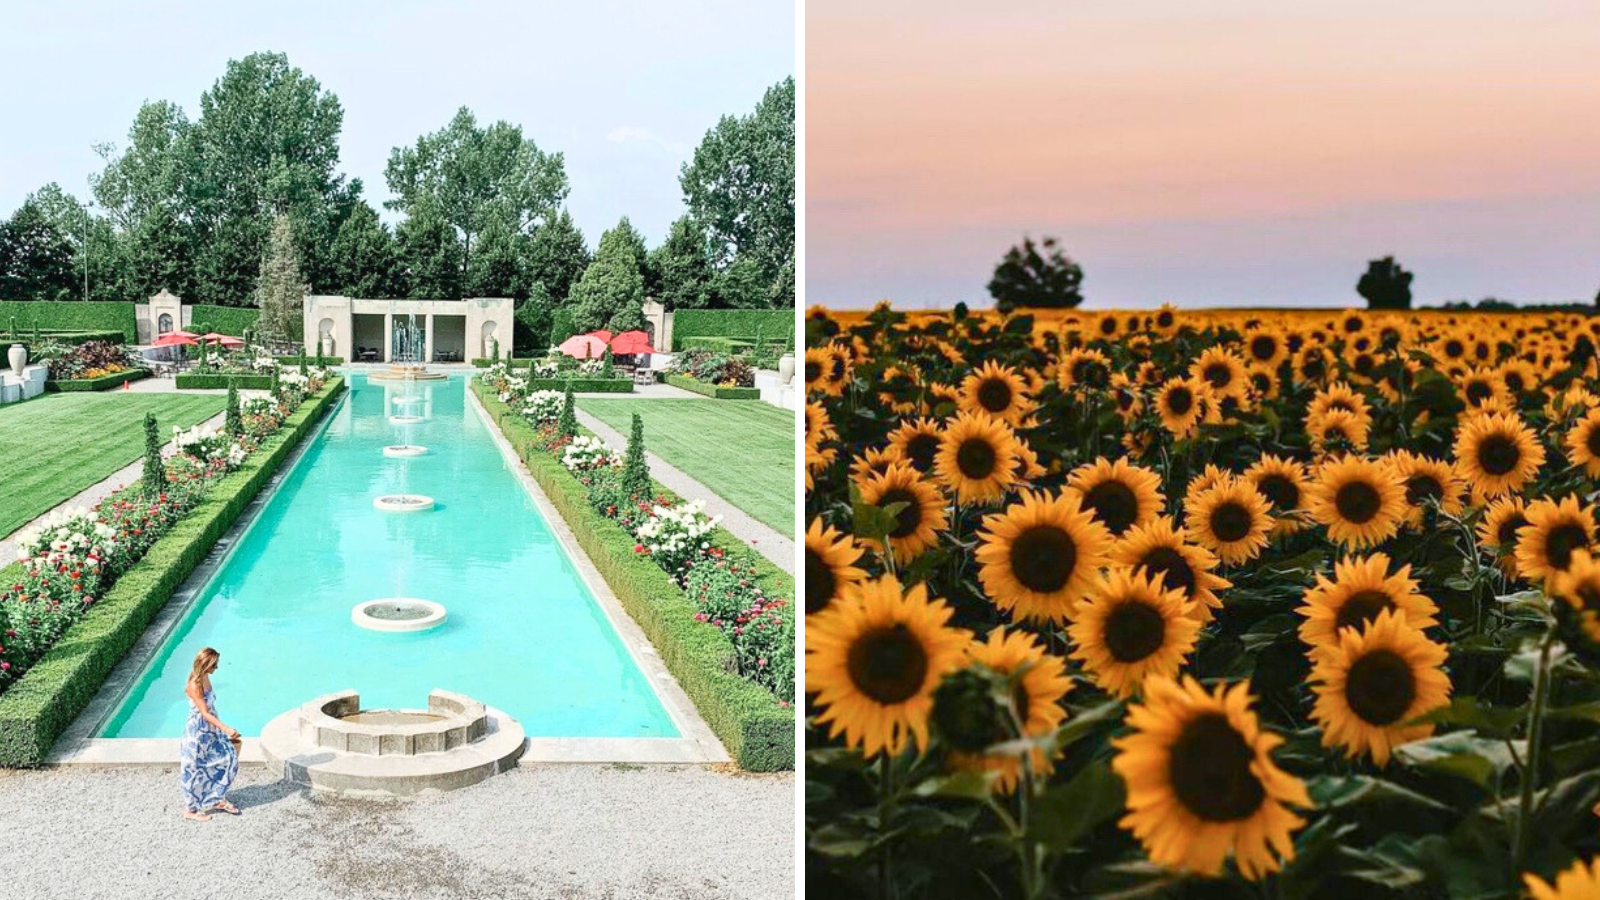 Collage of images include one of the pool at Parkwood Estates and the other of a field of sunflowers